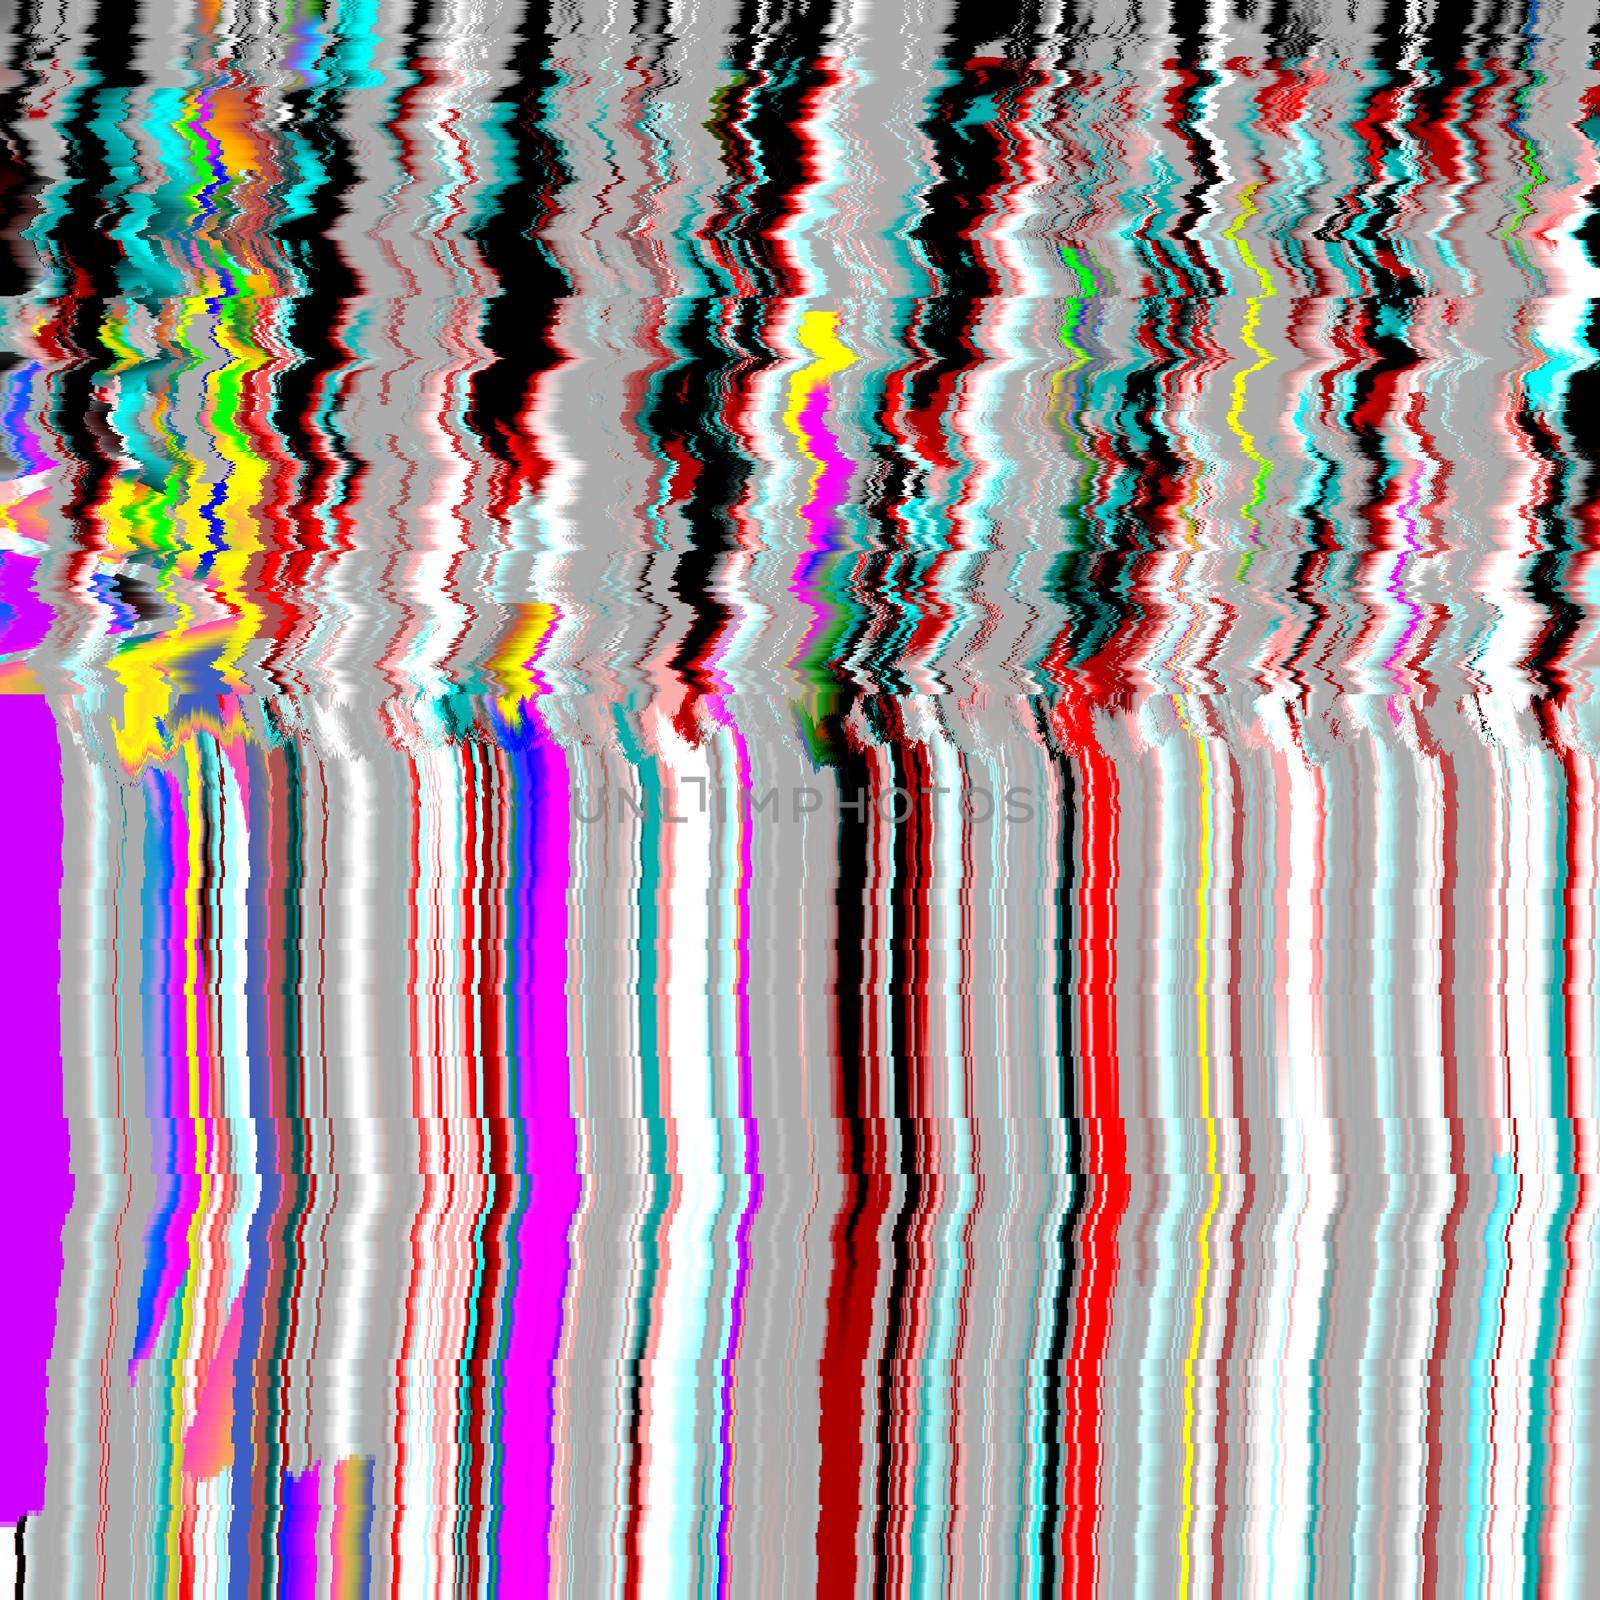 Glitch TV psychedelic Noise background Old screen error Digital pixel noise abstract design. Photo glitch. Television signal fail. Technical problem grunge wallpaper.